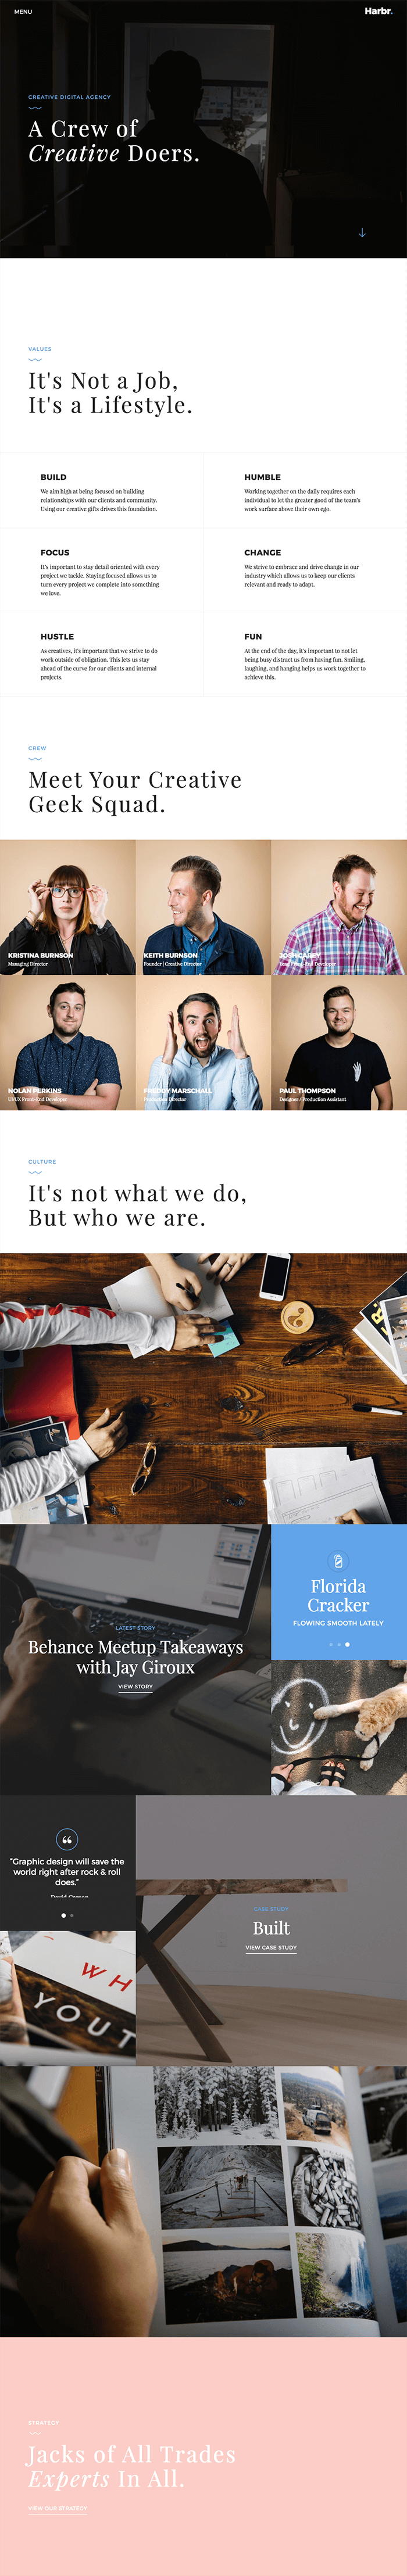 about us page design inspiration